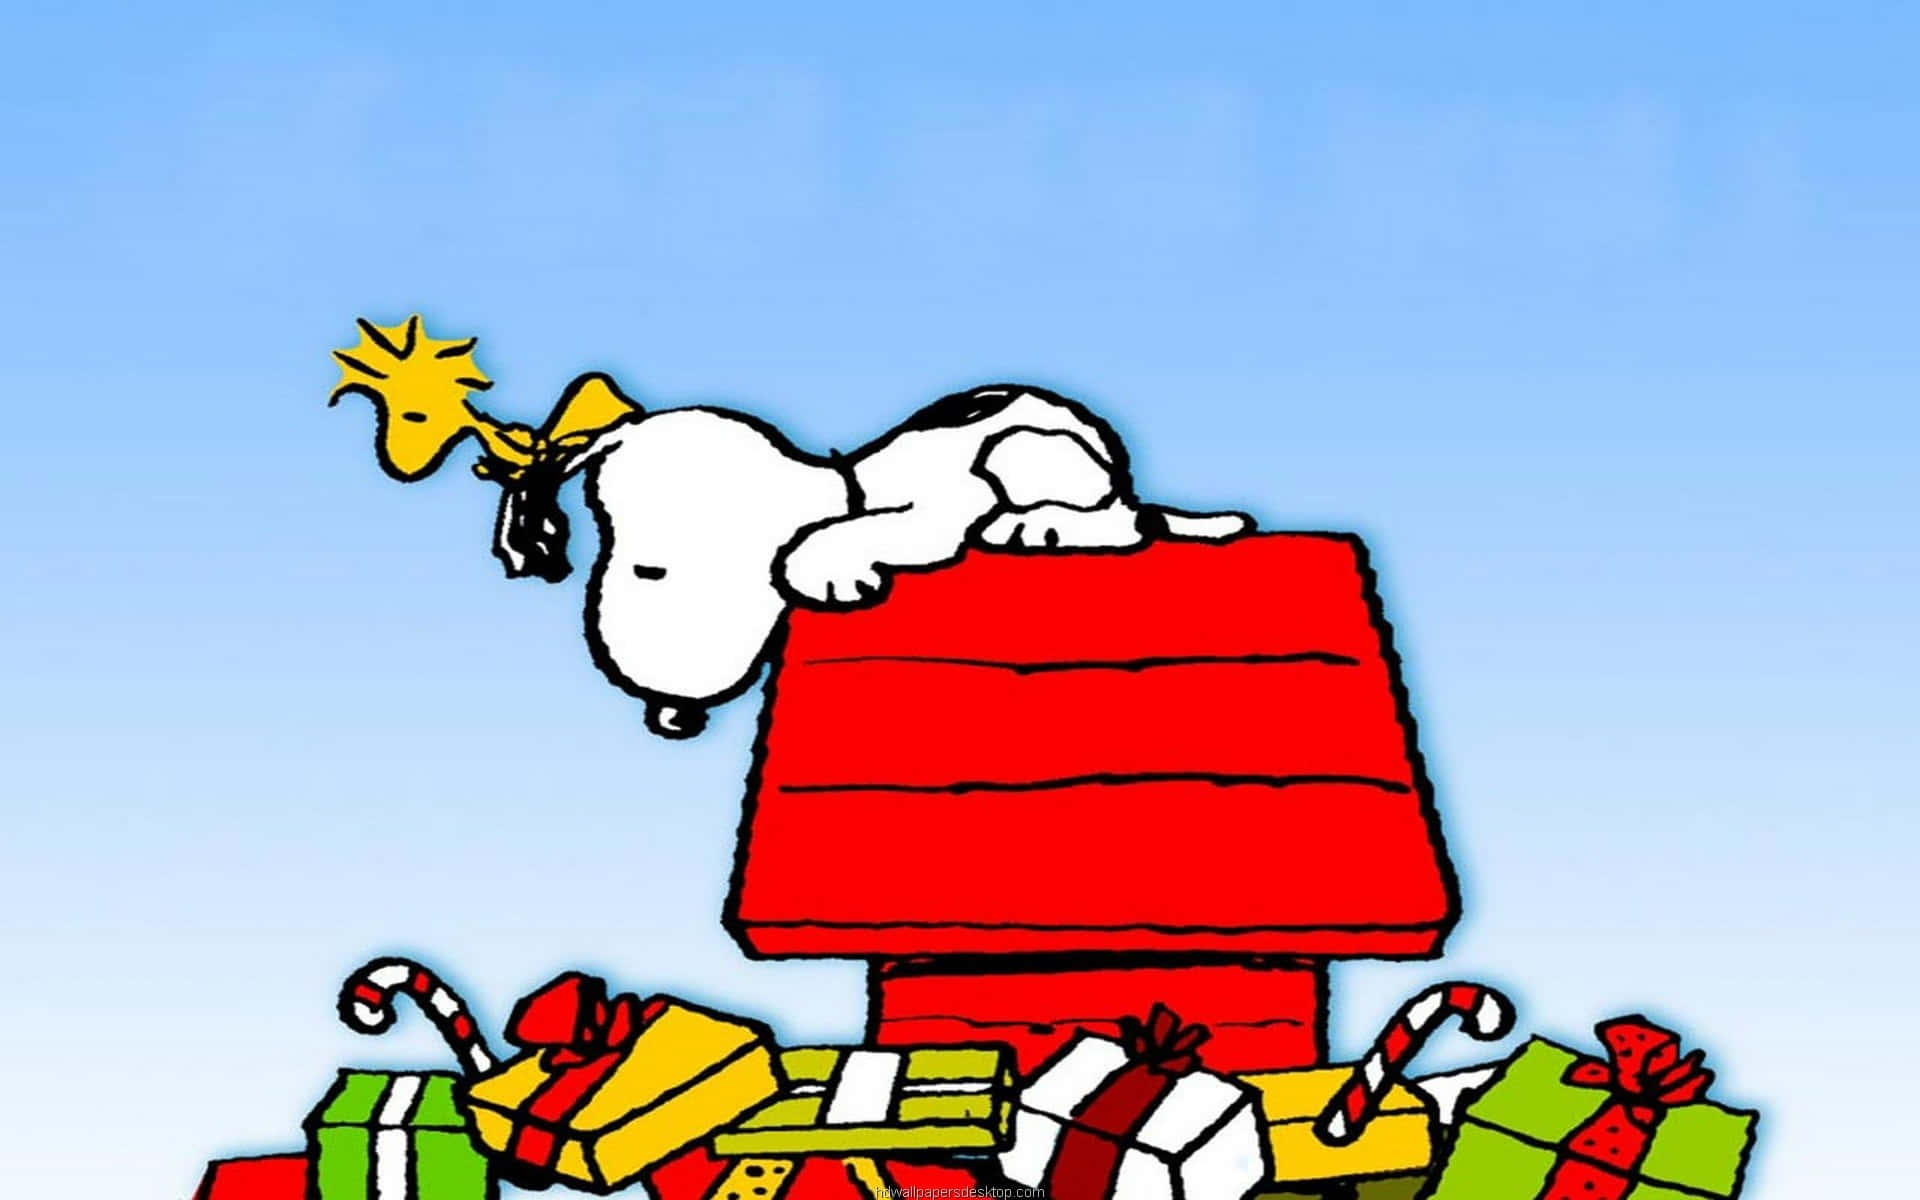 Snoopy the fearless flying ace!